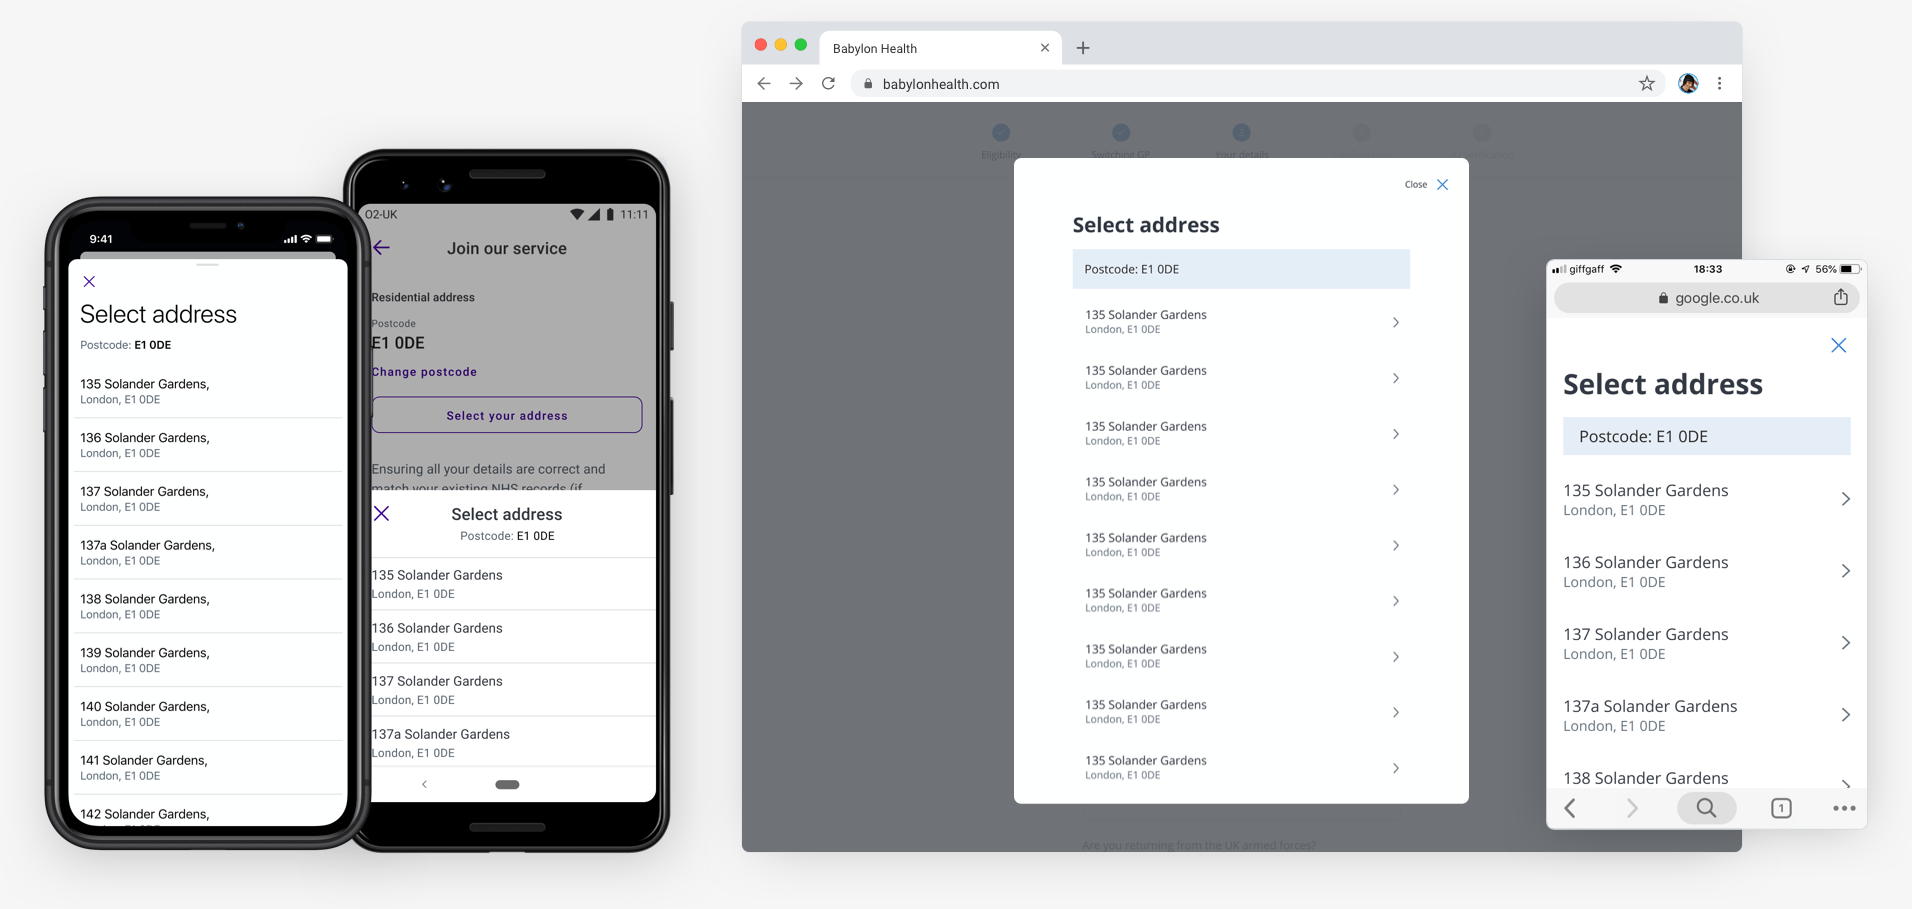 The GP at Hand address picker on iPhone, Android, and Web. The main address line is now on the first line, and the city and postcode sit on the second line for all platforms.